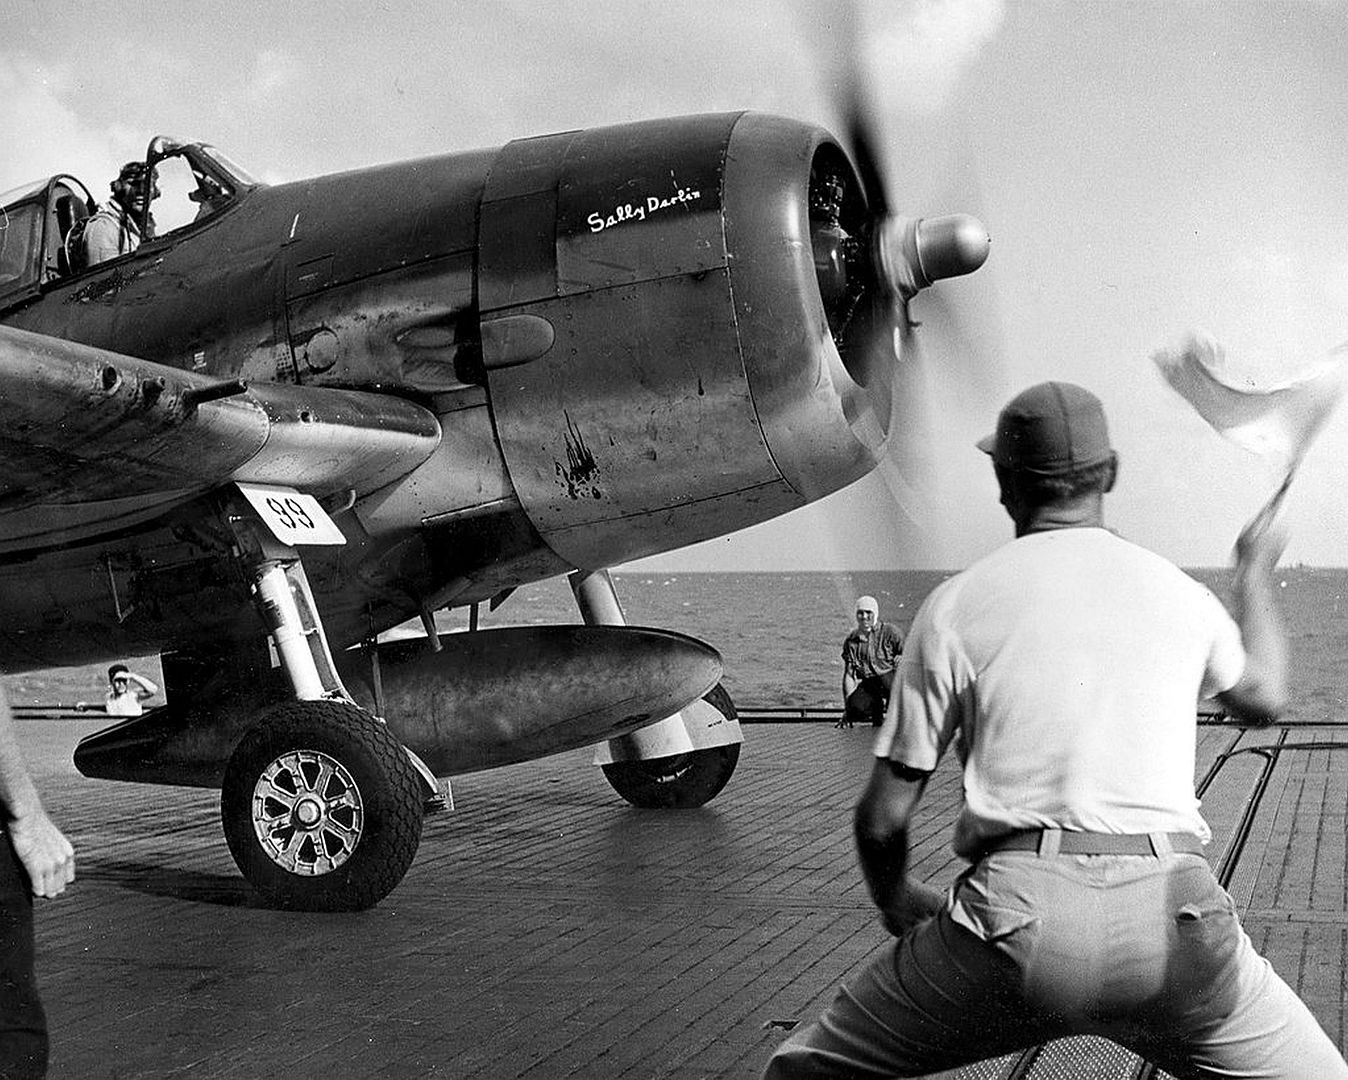 3 Hellcat About To Be Launched From Saratoga In 1944 During Flight Operations